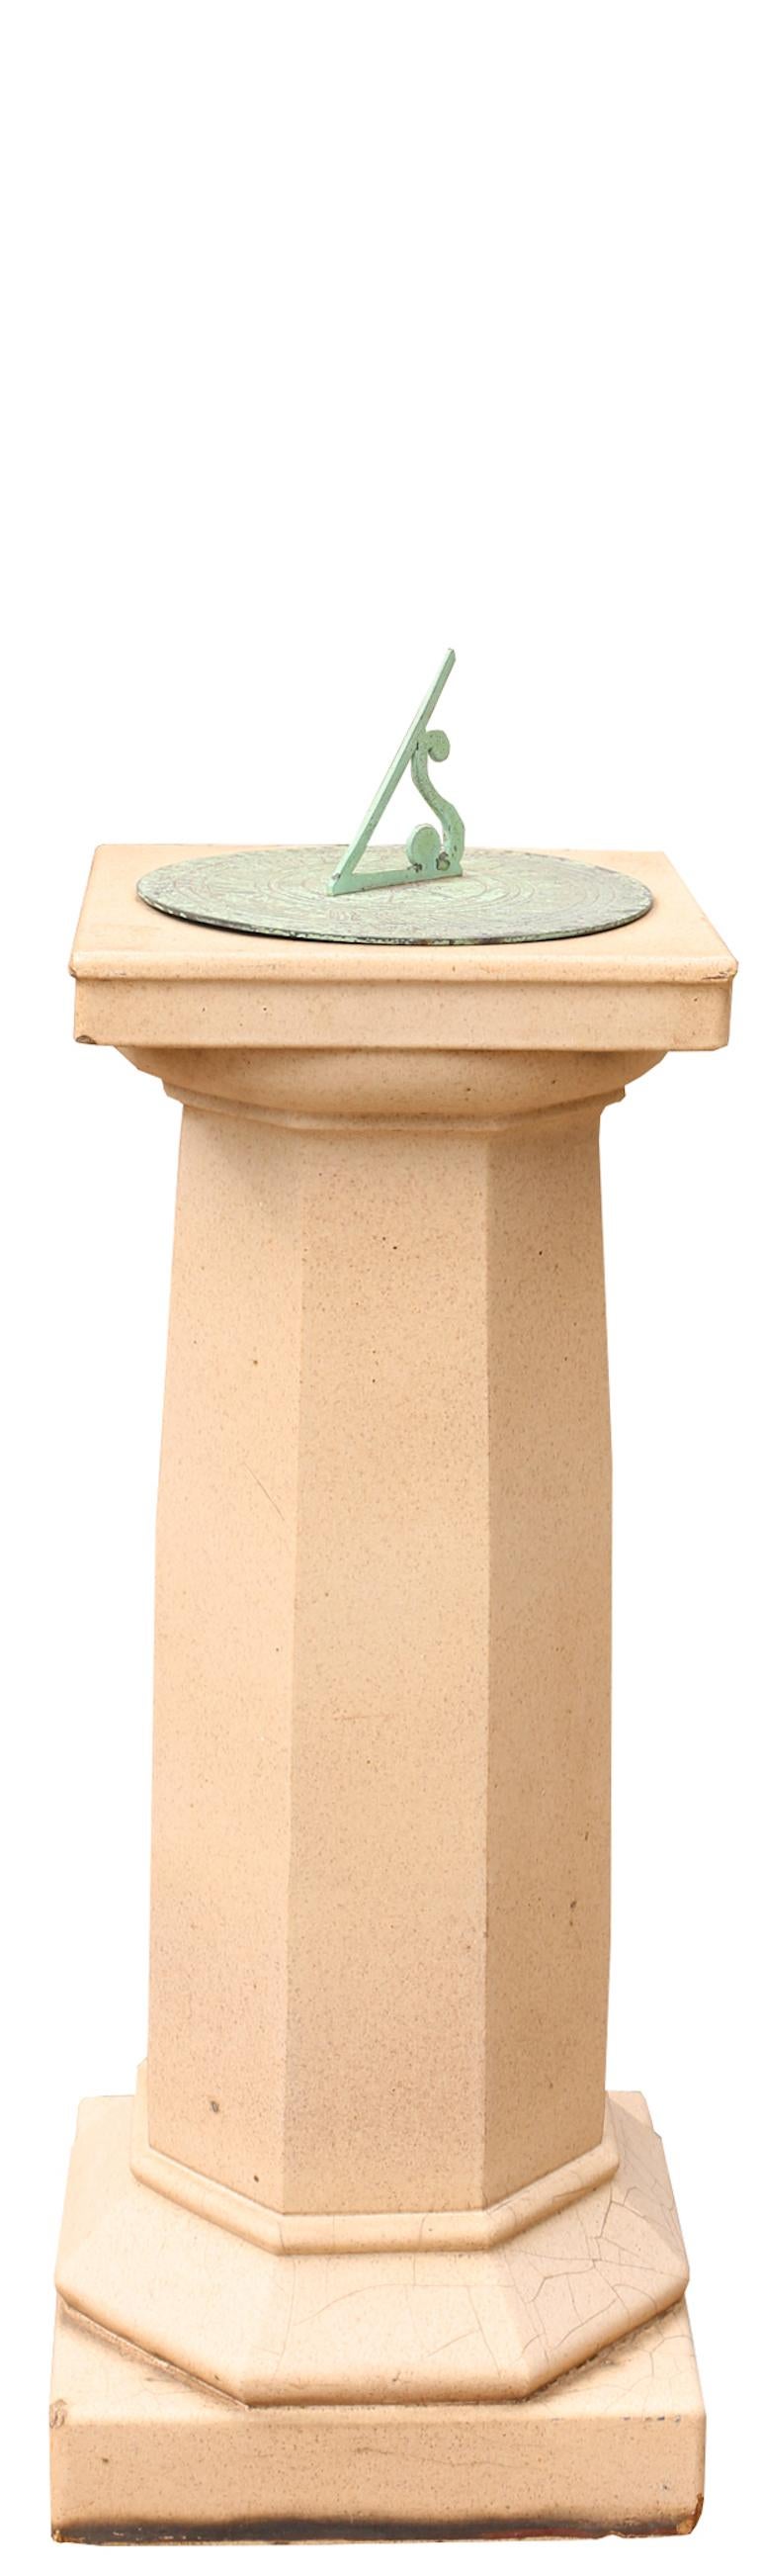 A glazed ceramic garden sundial with bronze sundial plate, attributed to LEFCO (Leeds Fire Clay Company).

Additional Dimensions

33.5 cm square base

25.5 cm diameter Sundial plate.